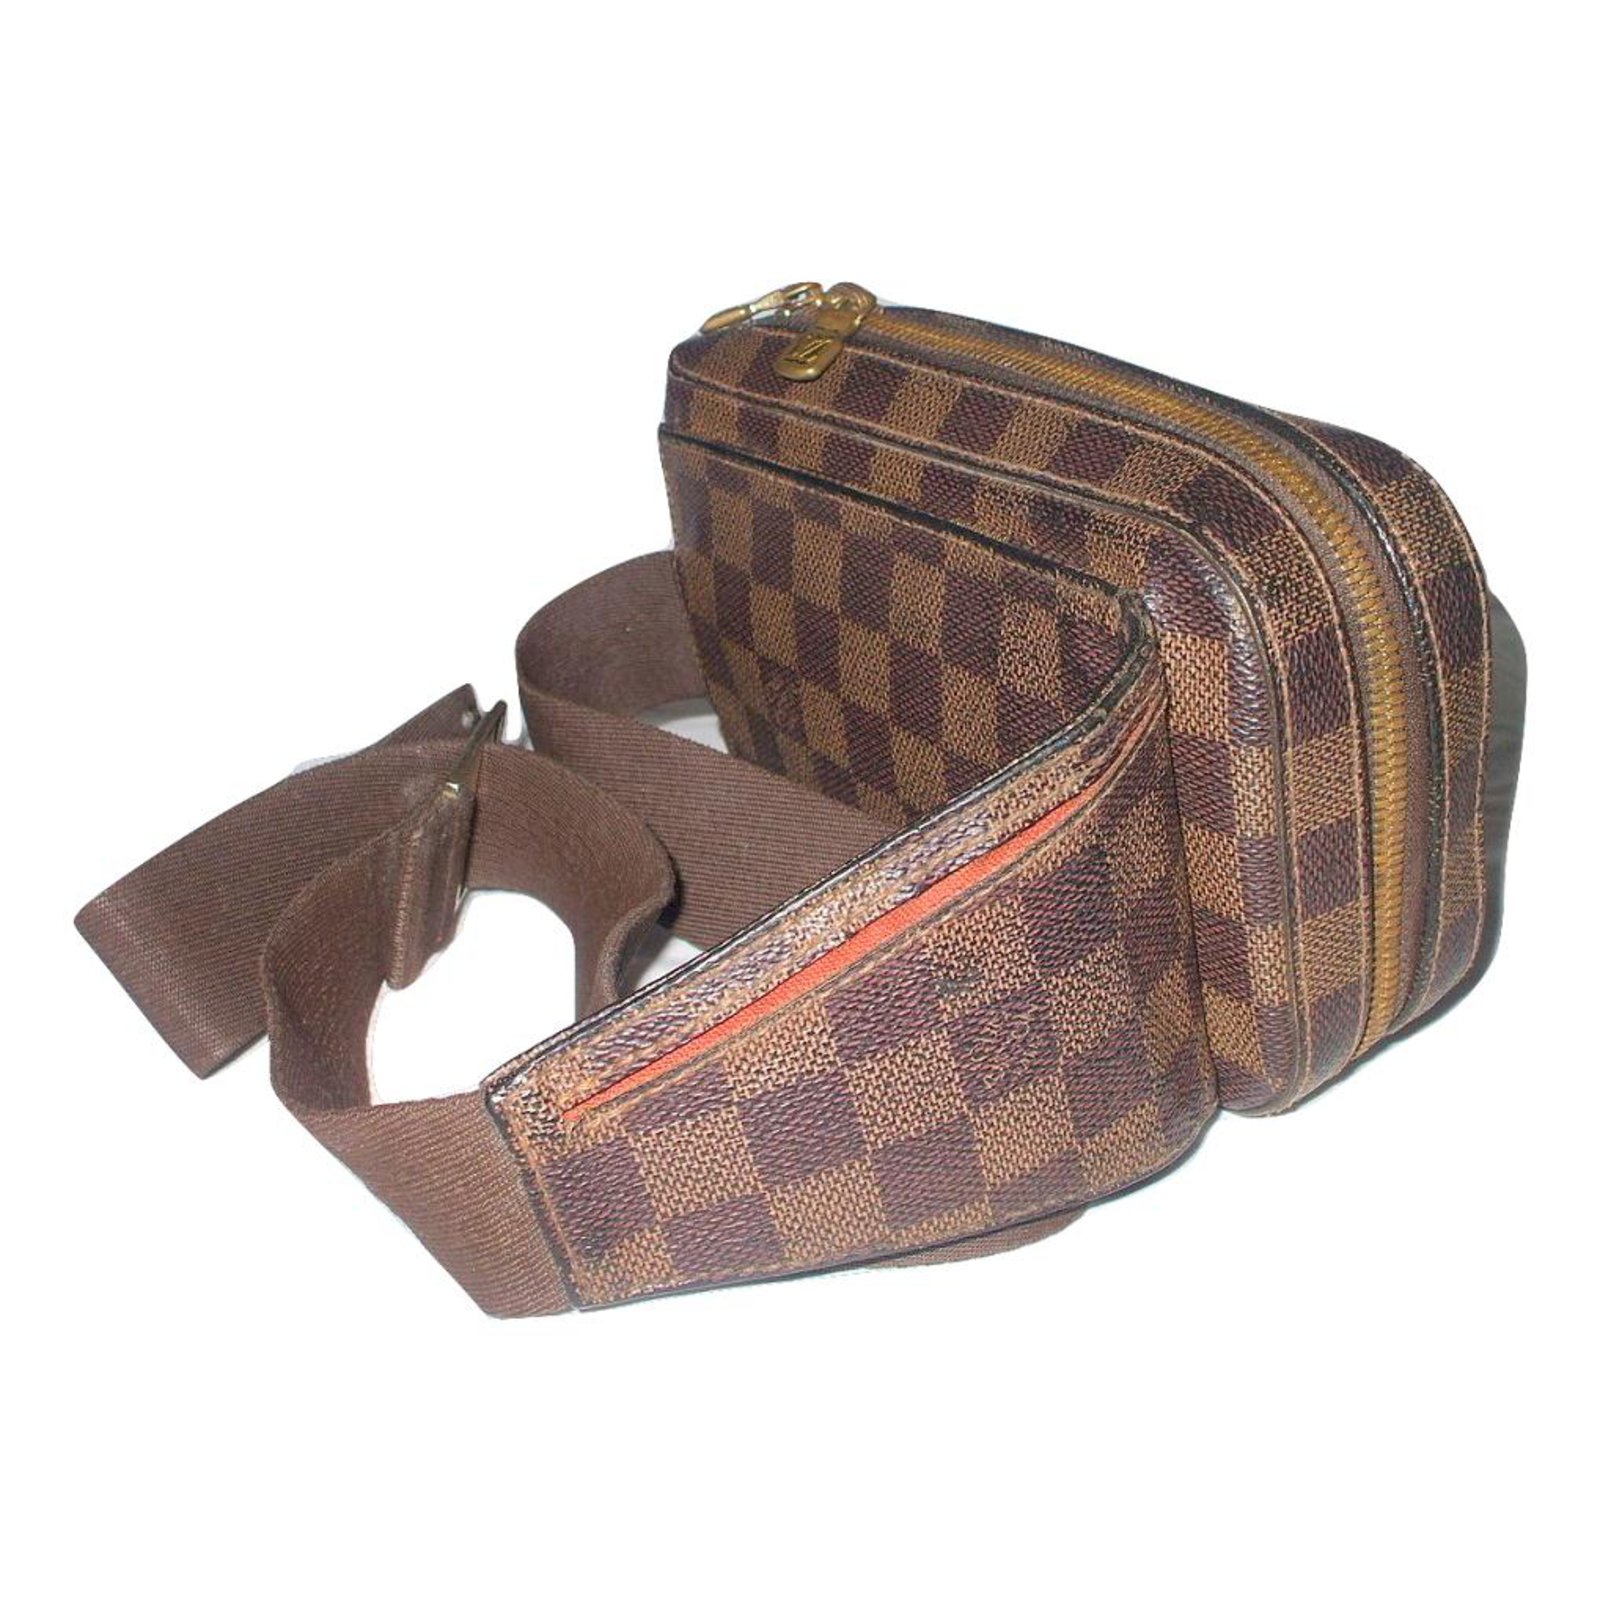 Louis Vuitton Geronimo Damier Ebene for Sale in Staten Island, NY